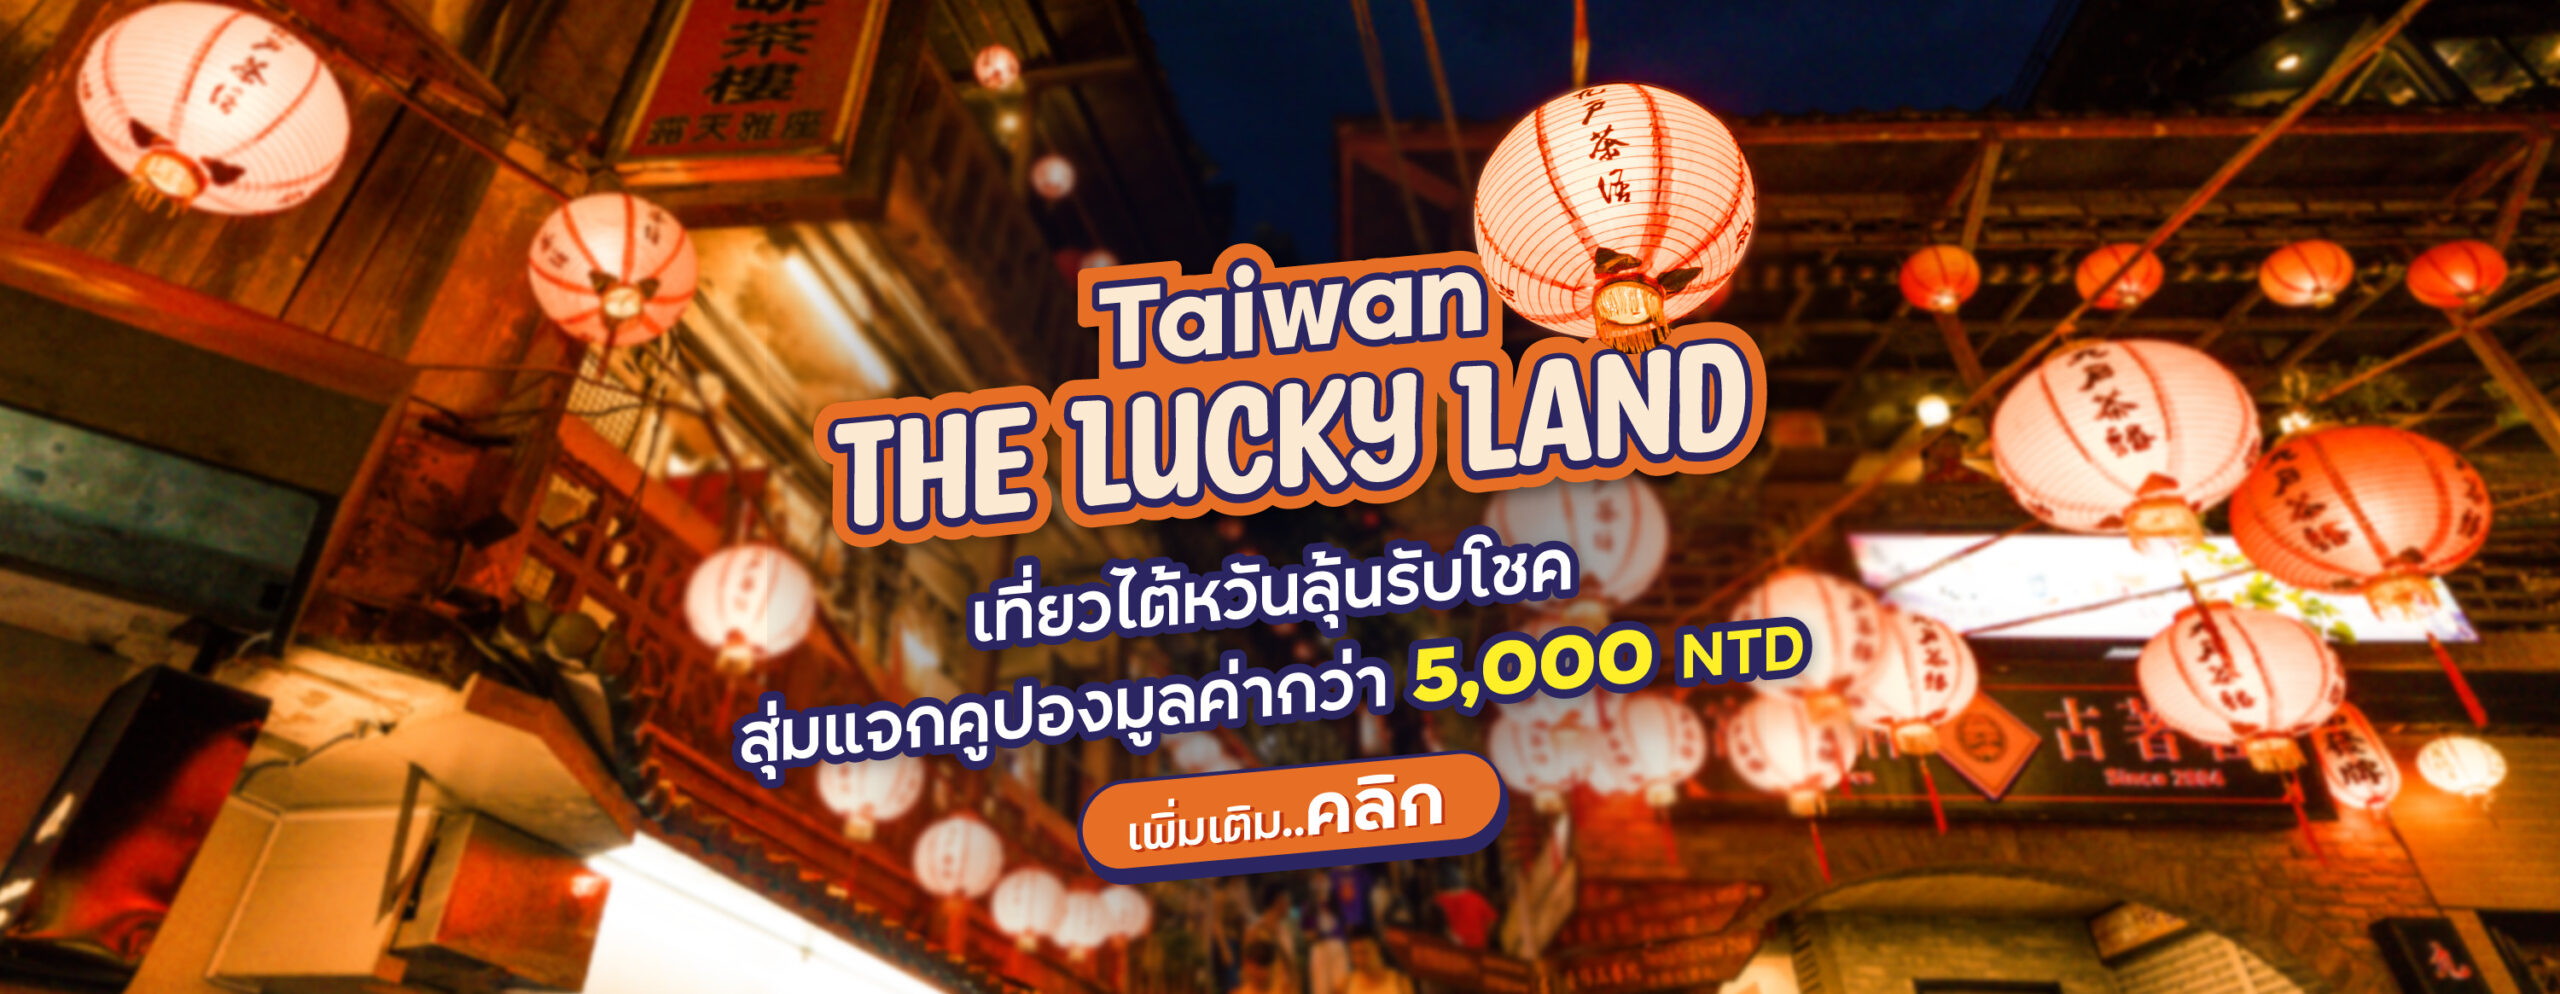 Taiwan Travel Voucher Giveaway - Taiwan The Lucky Land Campaign